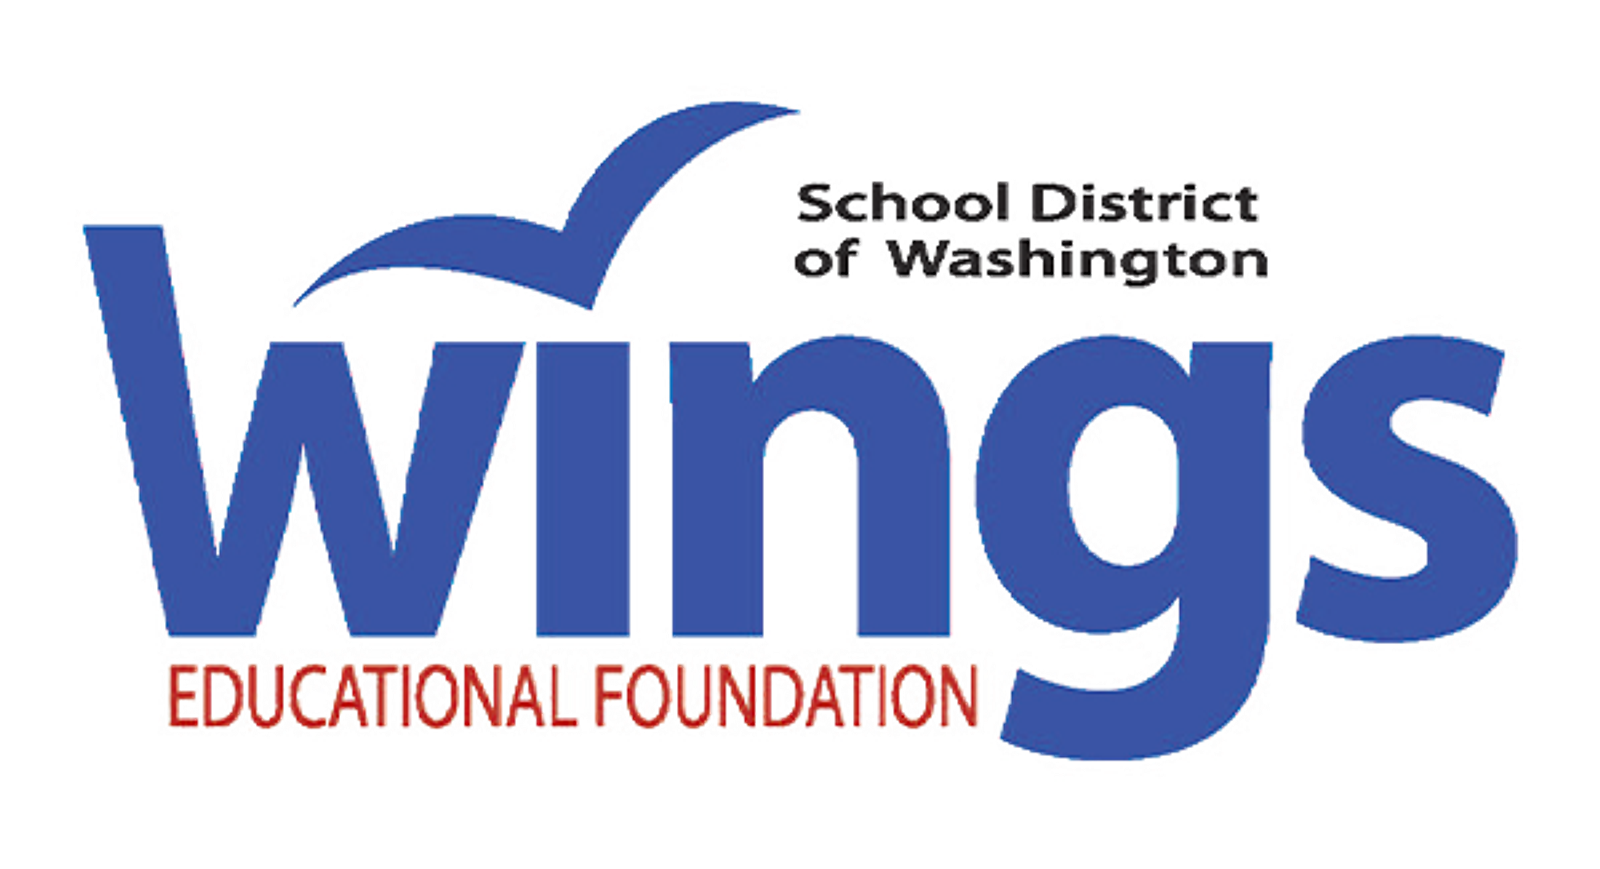 Wings Educational Foundation